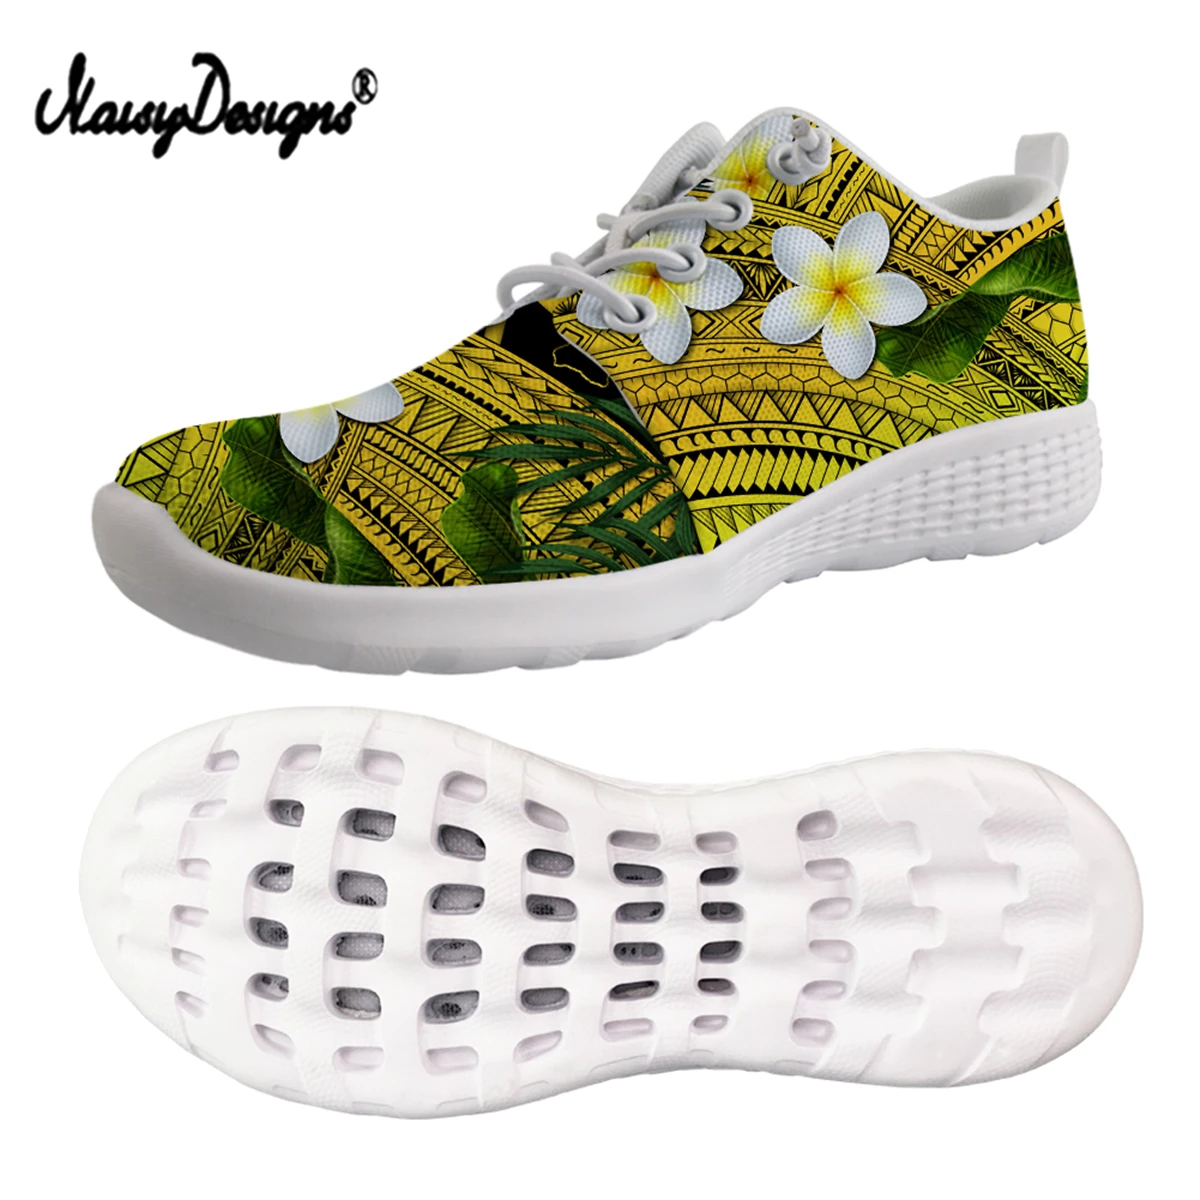 

Noisydesigns Hawaii Tribal With Plumeria Flower Unisex Swimming Water Shoes Barefoot Outdoor Beach Sandals Upstream Aqua Shoes